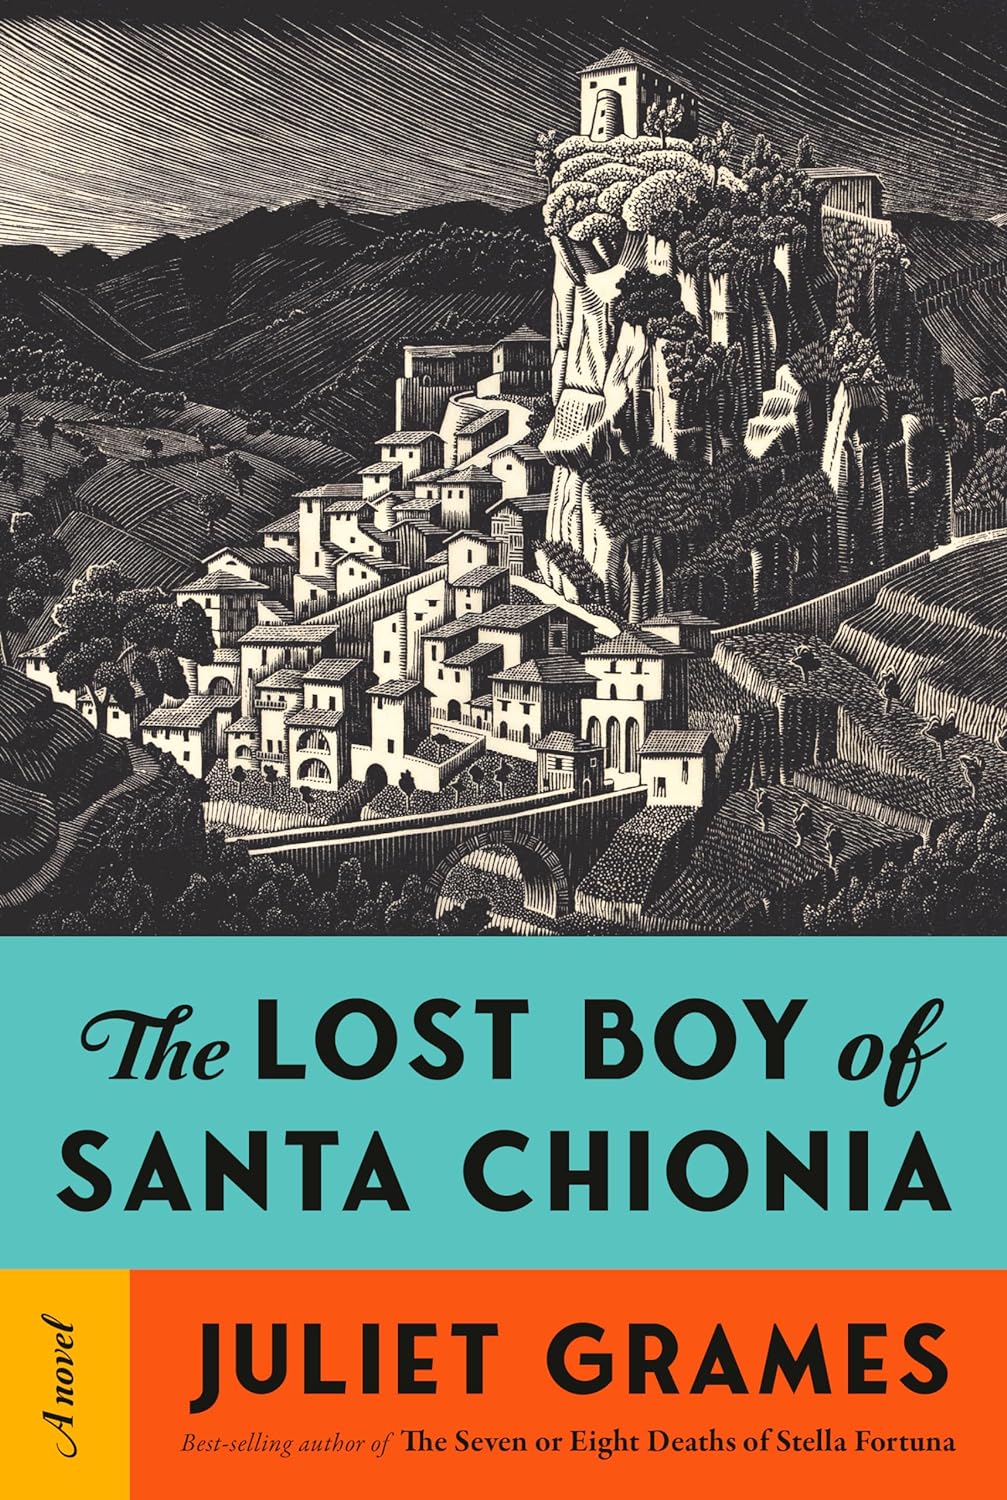 Image for "The Lost Boy of Santa Chionia"